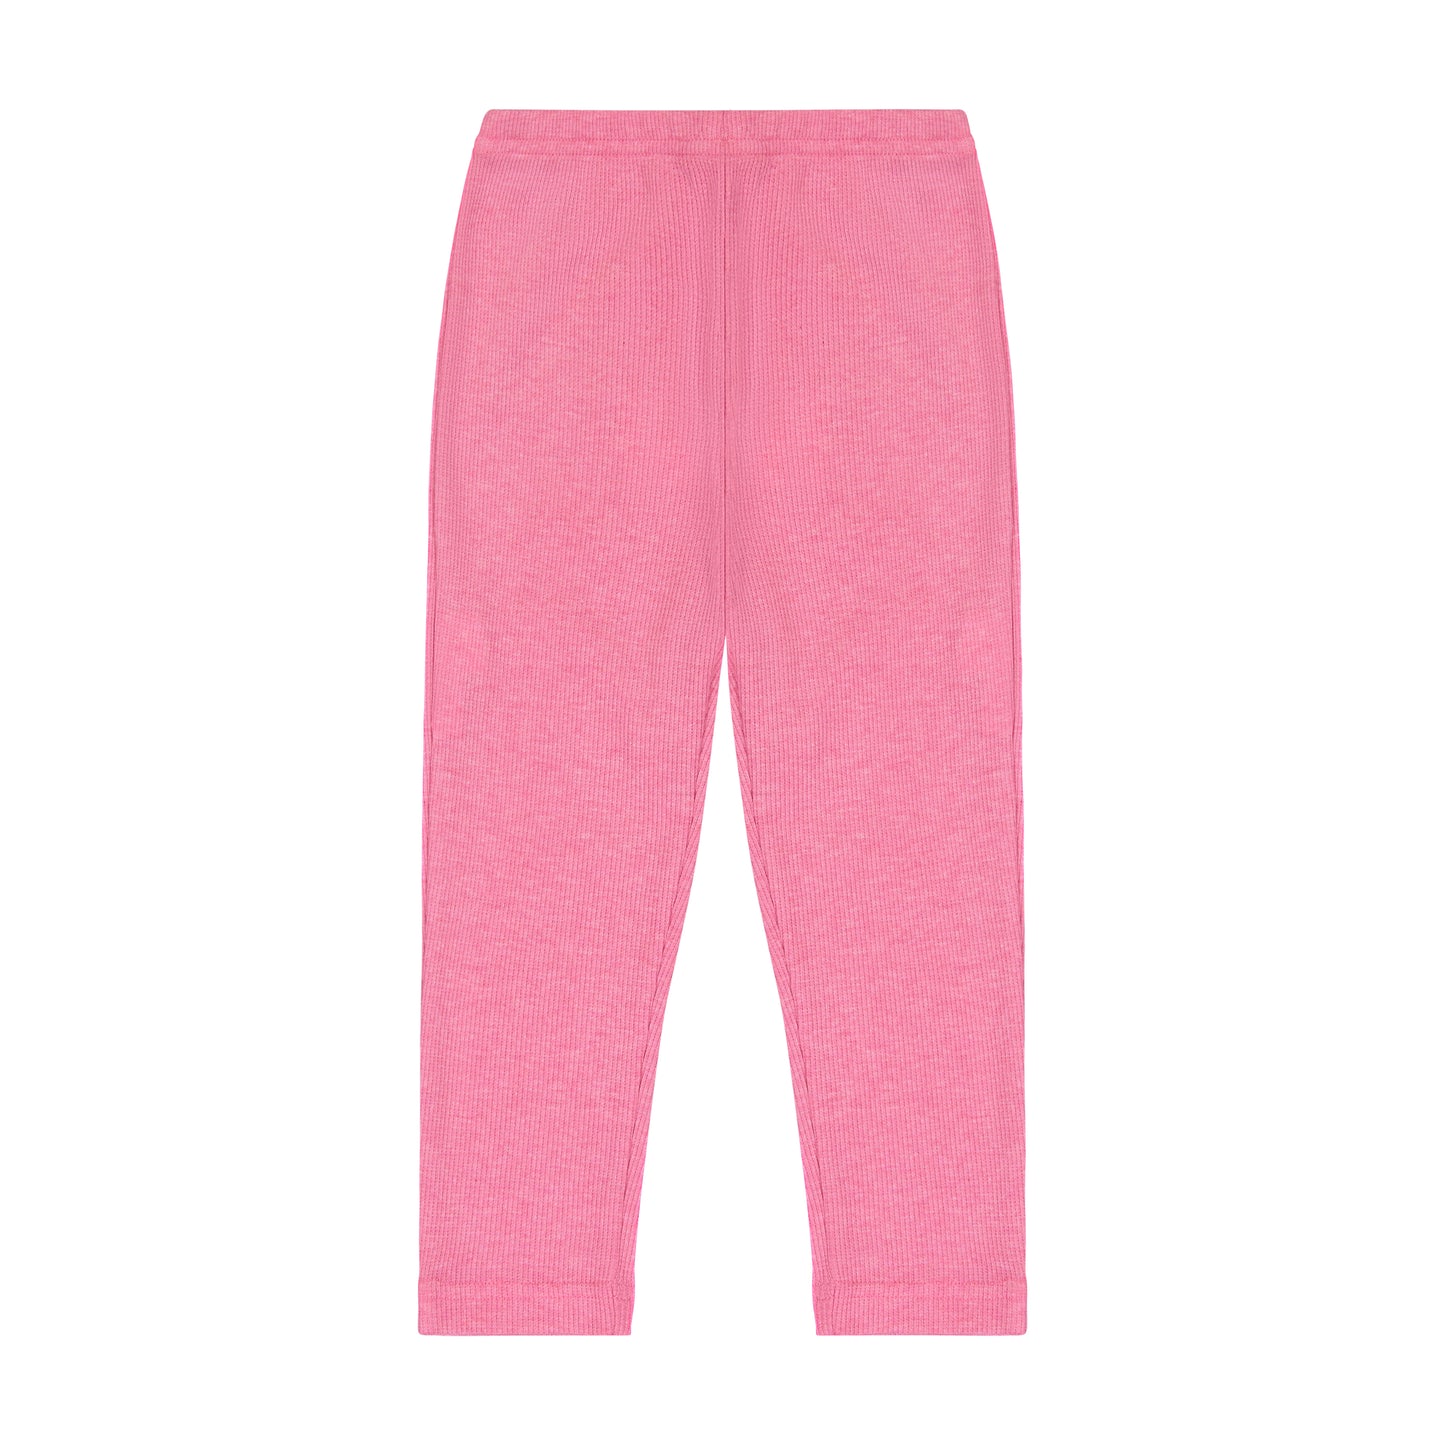 Leggings Pink Ribbed Knit – Busy Bees